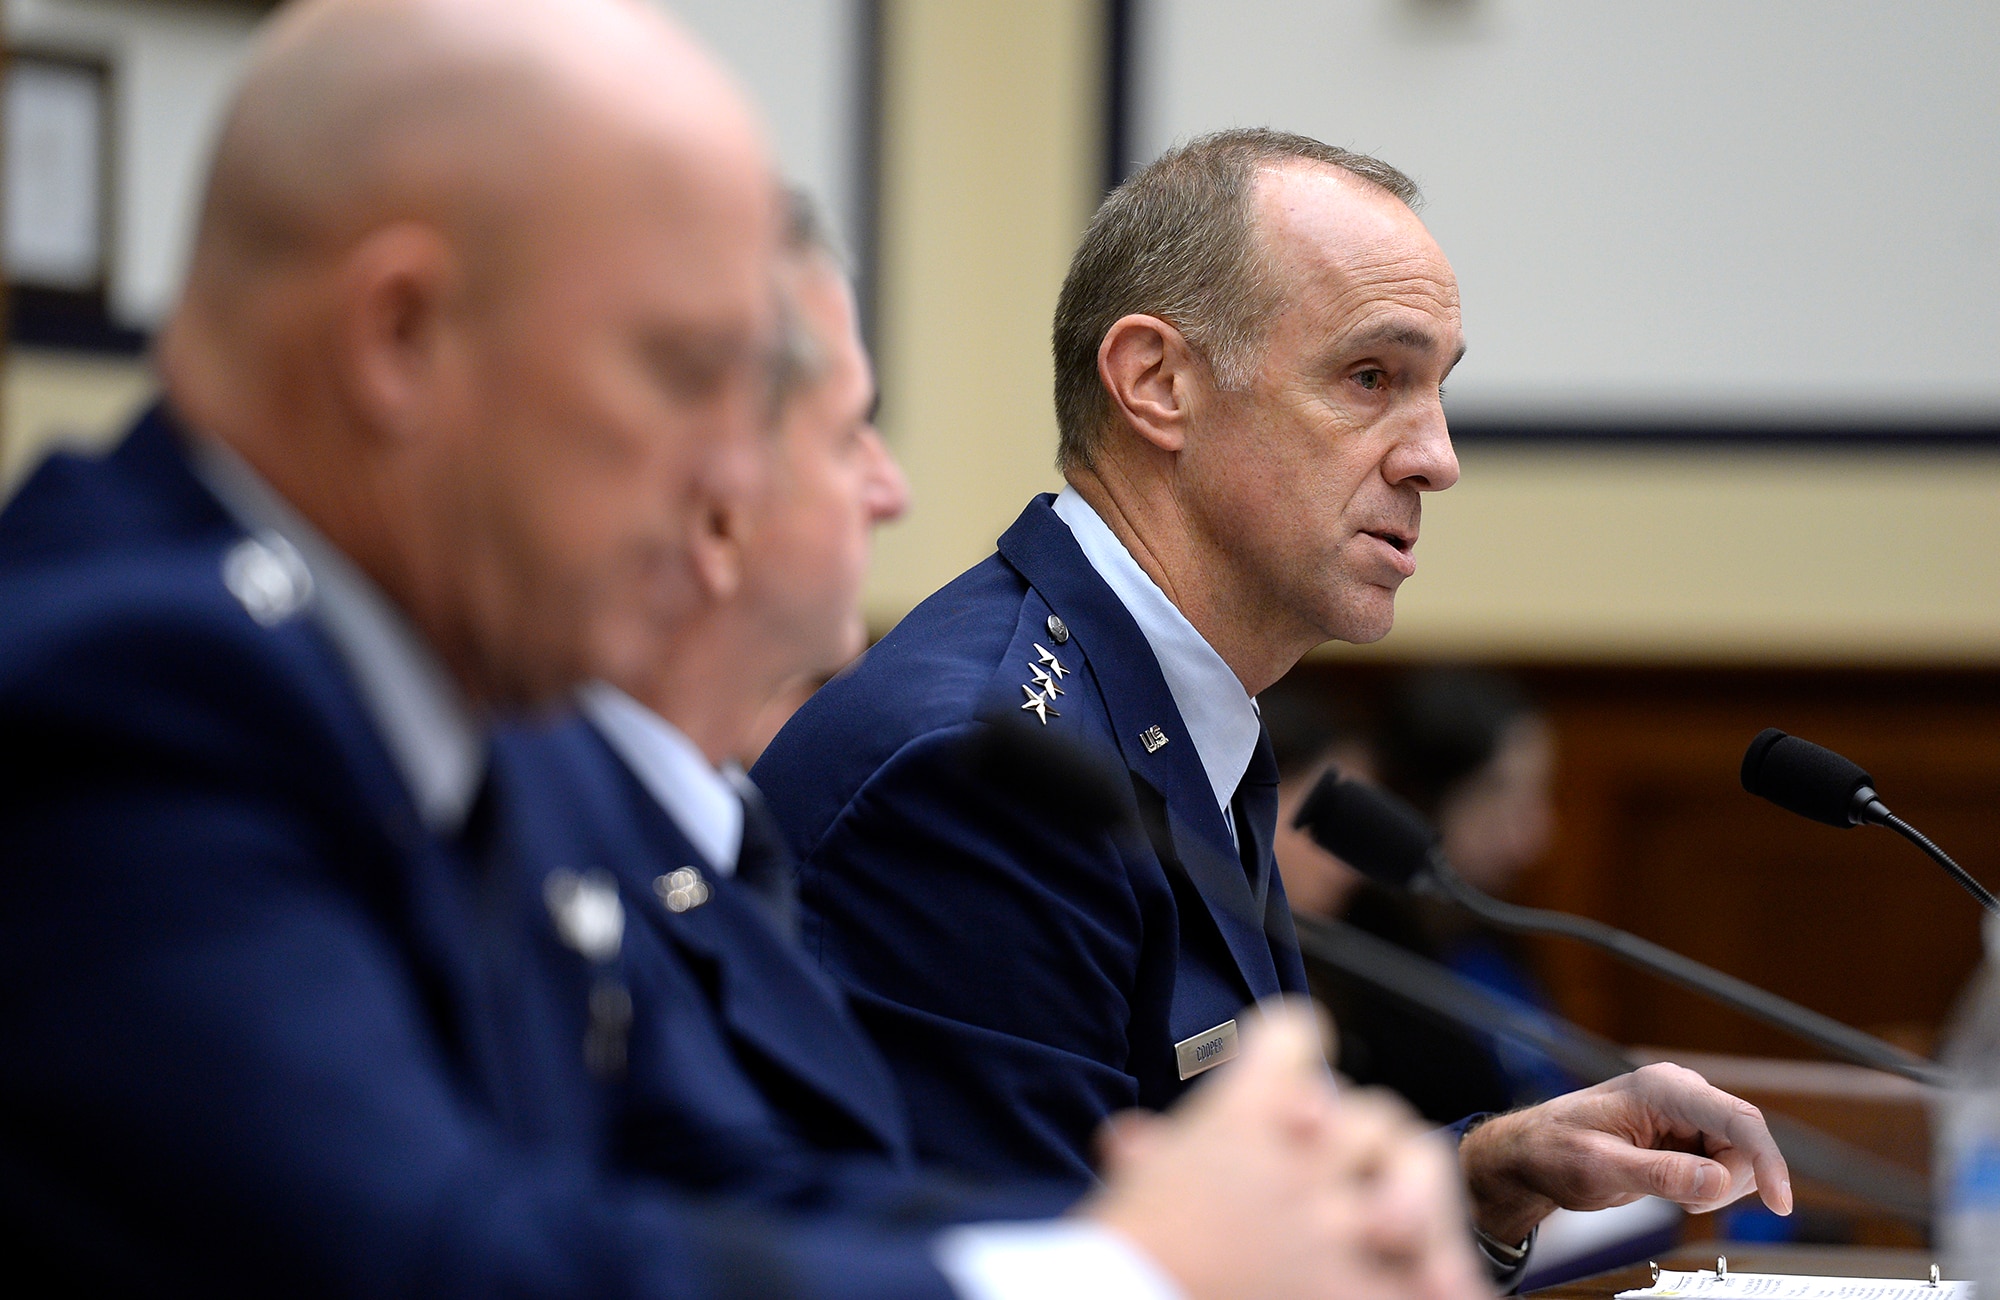 Air Force Vice Chief of Staff Gen. David Goldfein testifies before the House Armed Services Committee on the current readiness of the service in Washington, D.C., Feb. 12, 2016. Testifying with him were Lt. Gen. John Raymond, the Air Force deputy chief of staff for operations, and Lt. Gen. John Cooper, the deputy chief of staff for logistics, engineering and force protection. (U.S. Air Force photo/Scott M. Ash)
